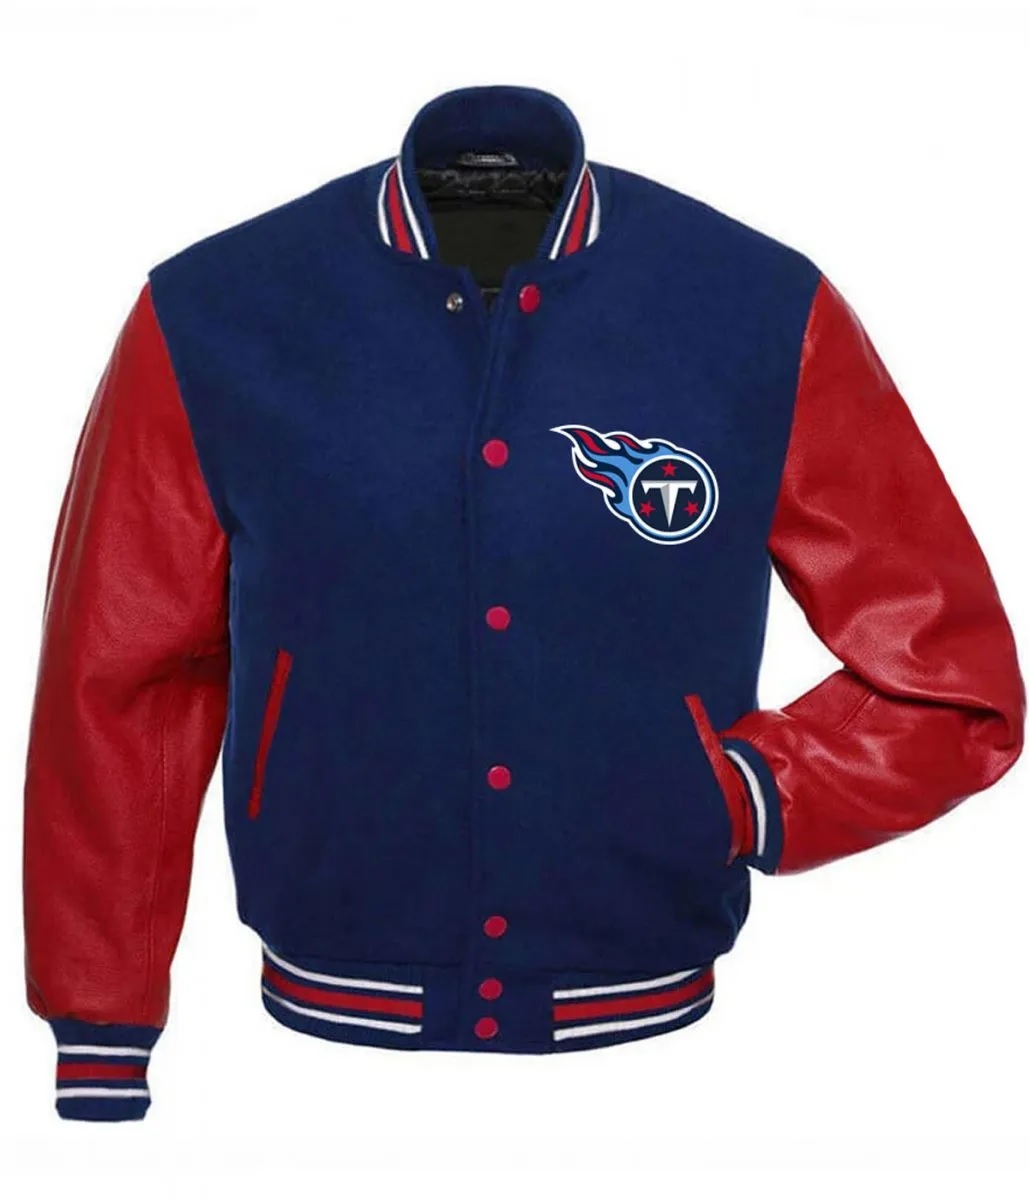 Tennessee Titans Varsity Red and Blue Jacket